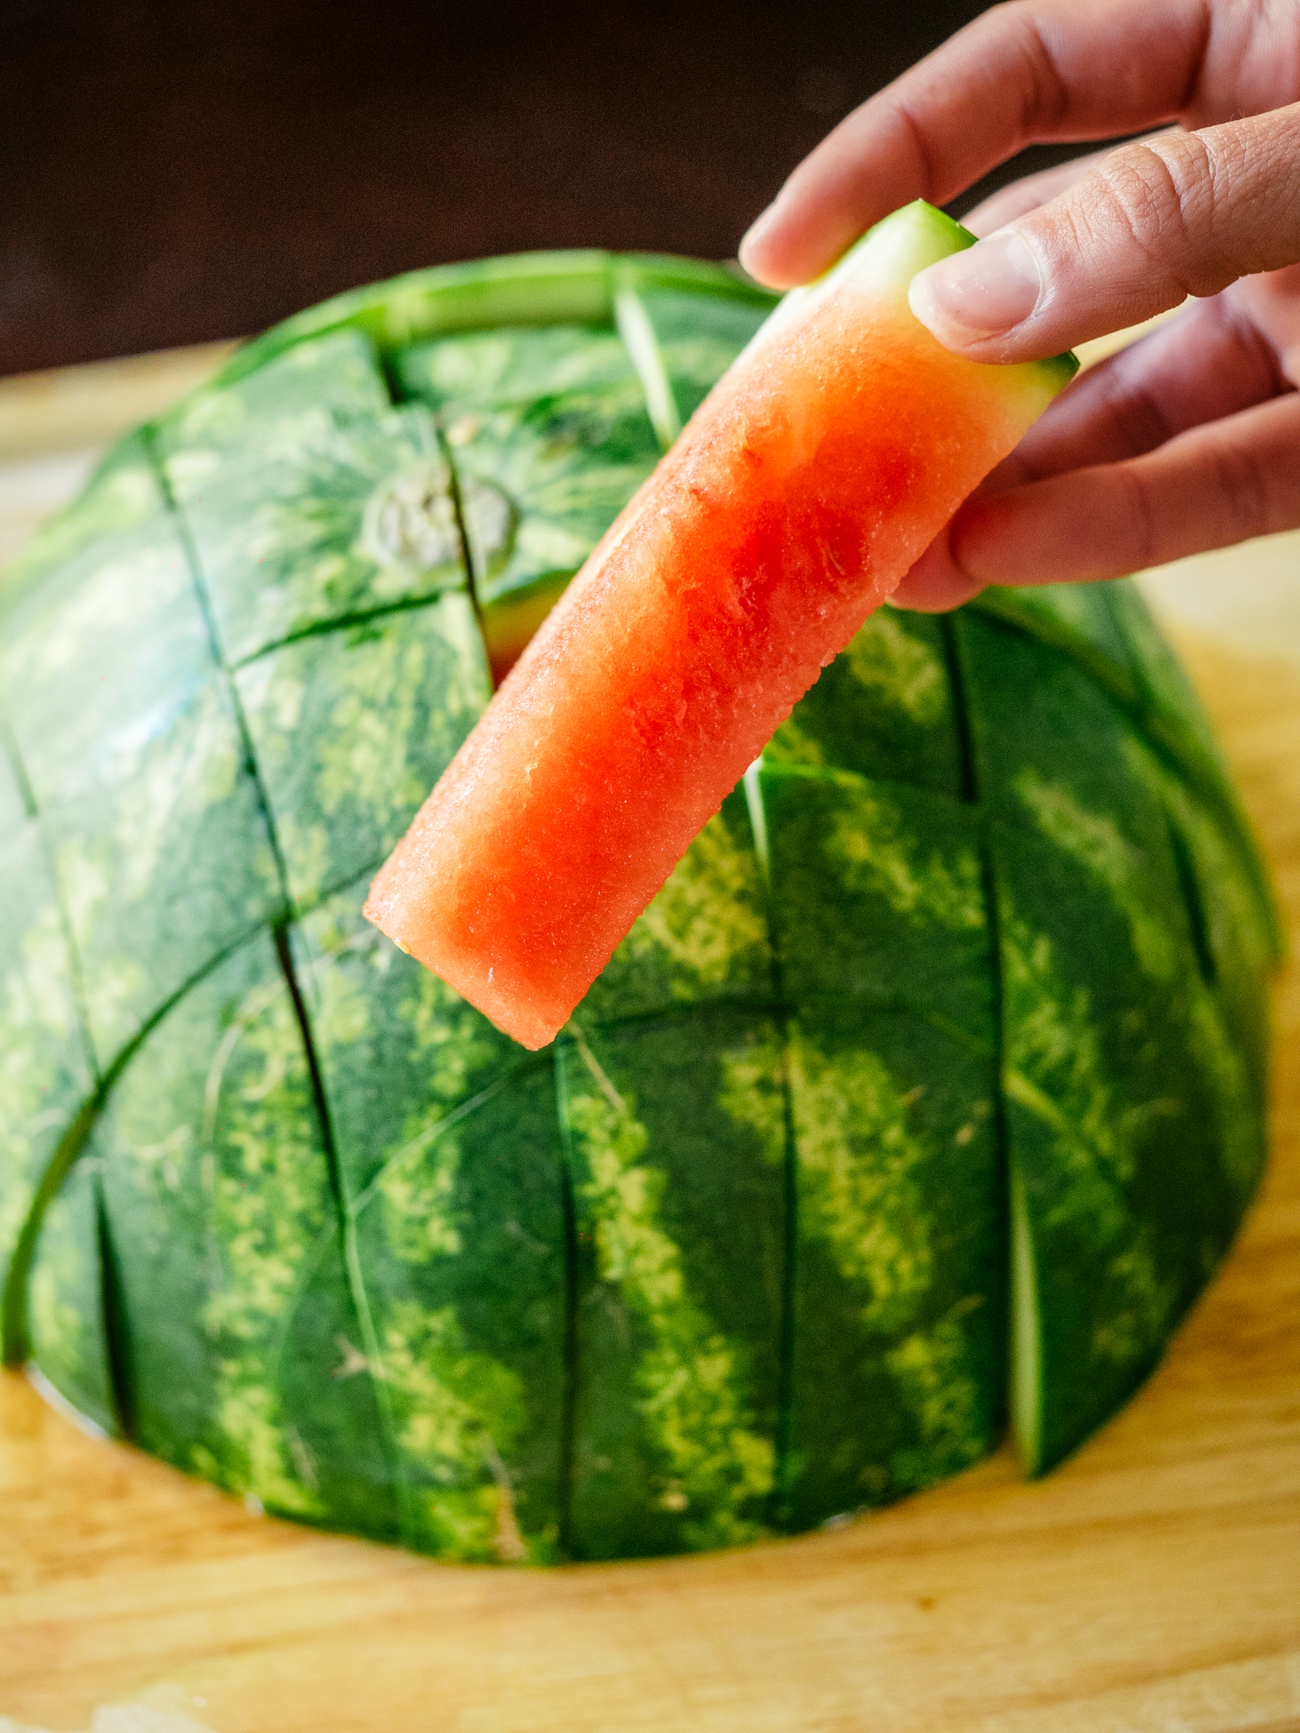 Effortless Watermelon Cutting: A Comprehensive Tutorial For Beginners